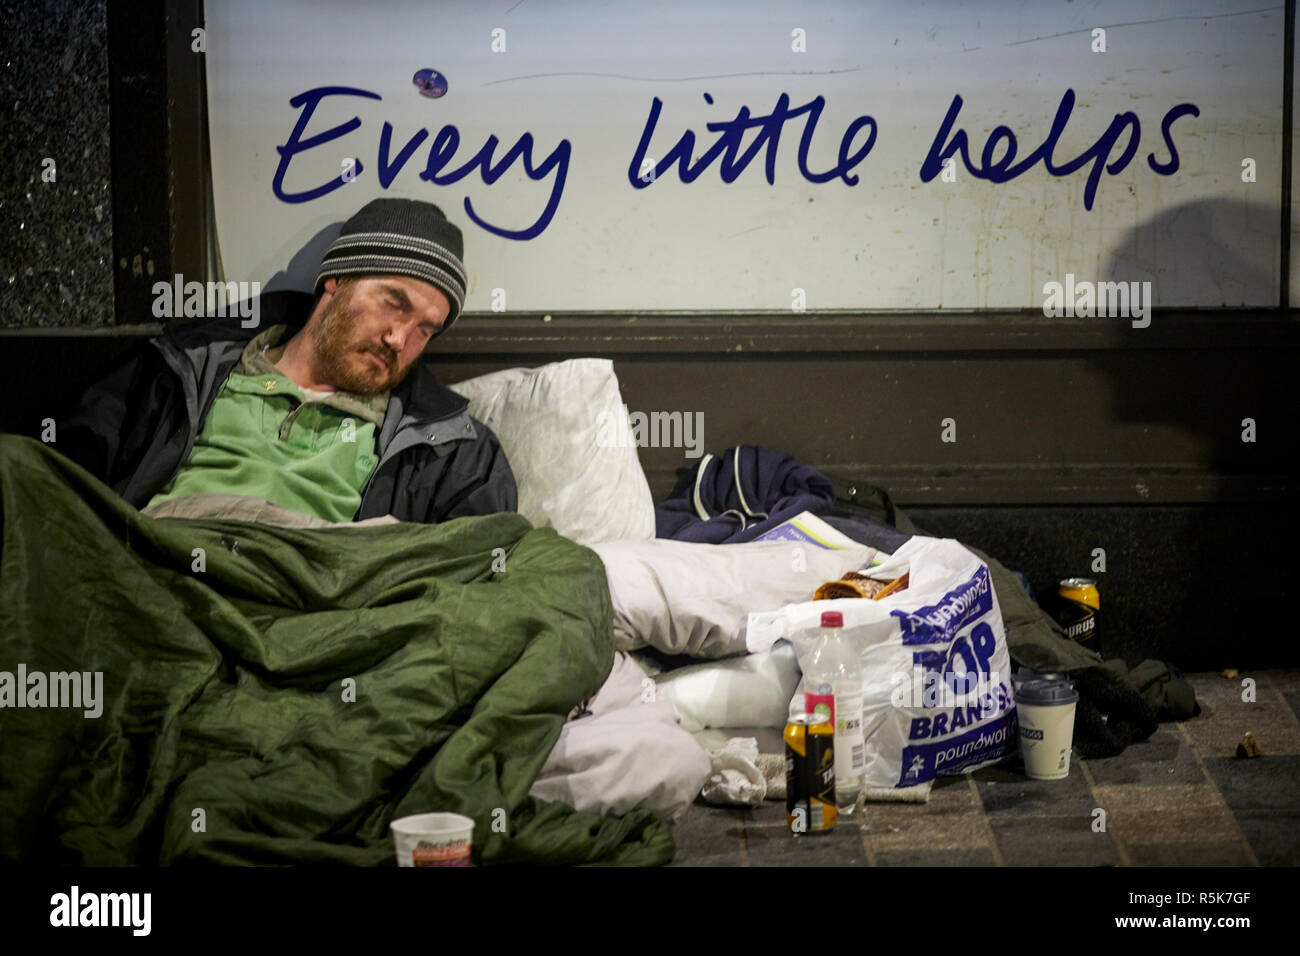 Liverpool city centre sleeping homeless begging man with mess around him as he sleeps, every little helps tesco slogan Stock Photo